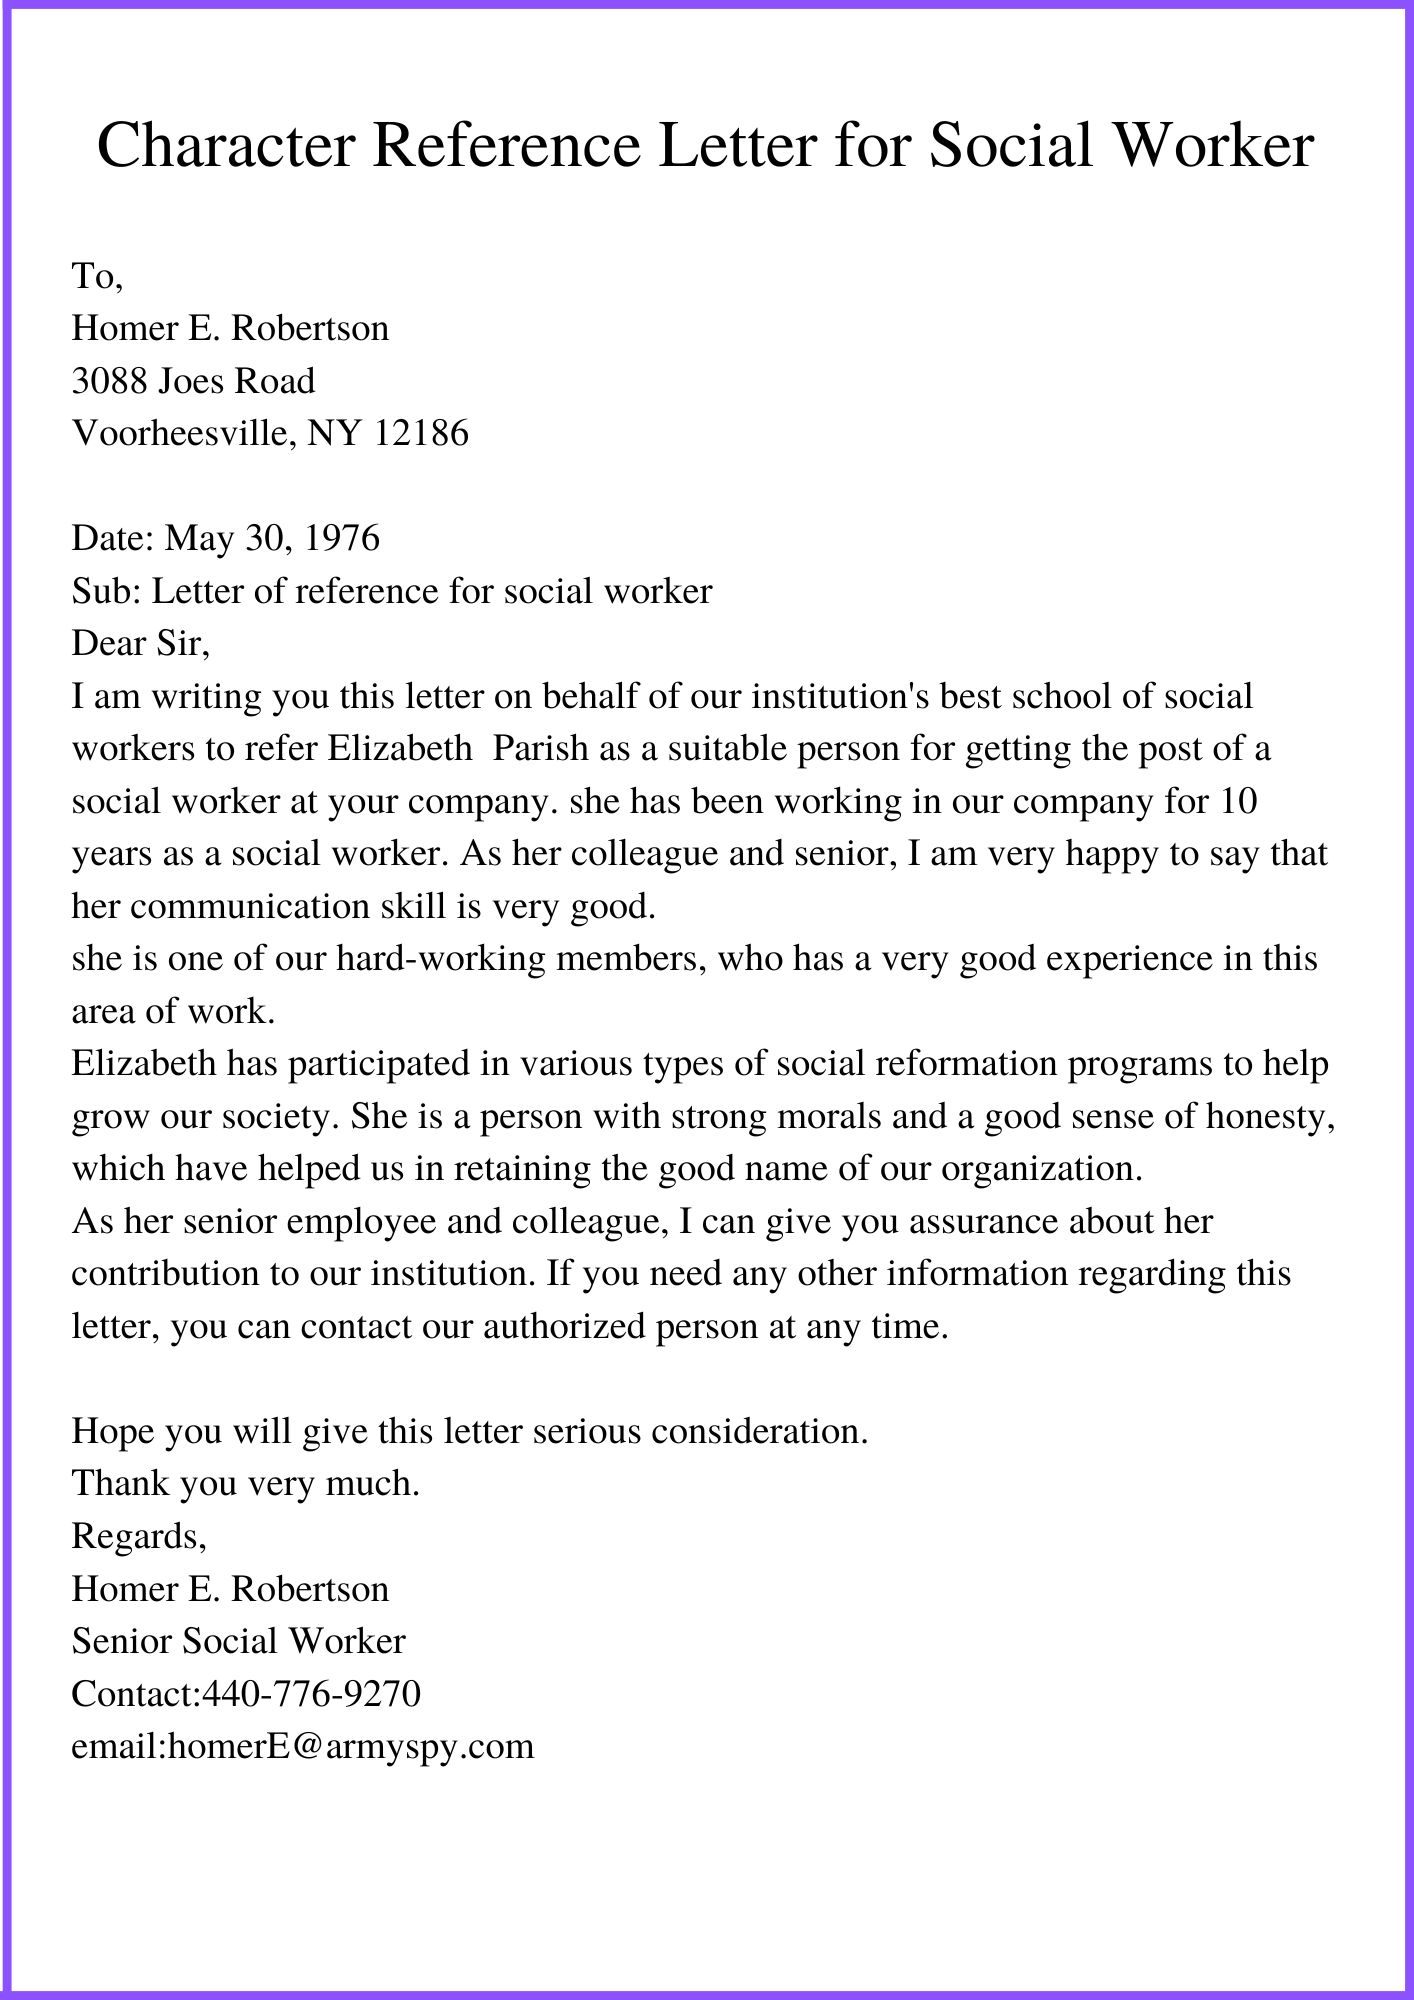 Character Reference Letter for Social Worker